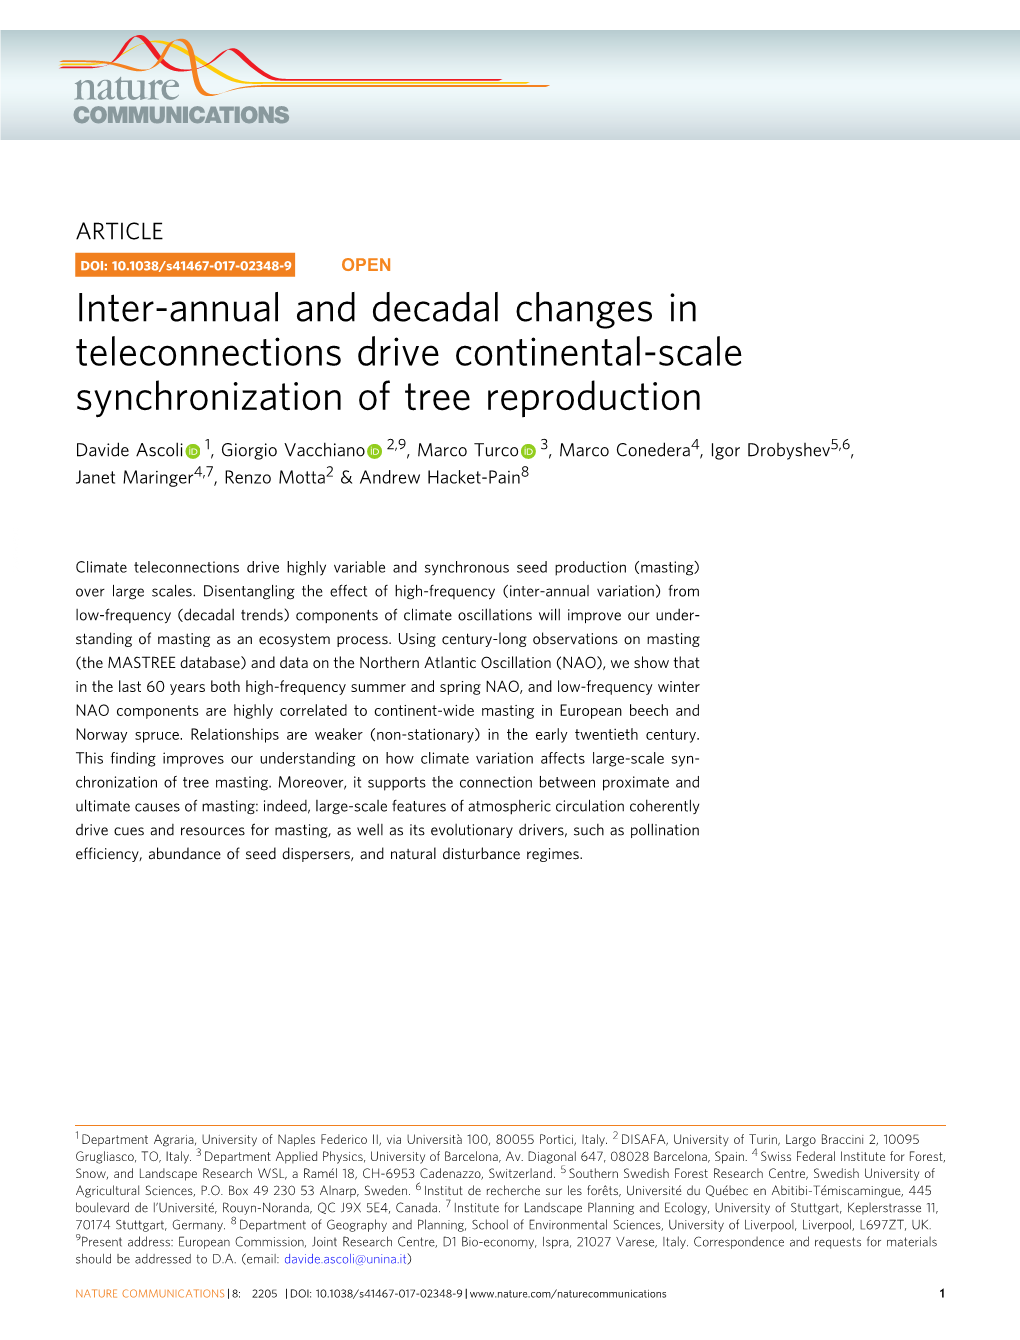 Inter-Annual and Decadal Changes in Teleconnections Drive Continental-Scale Synchronization of Tree Reproduction